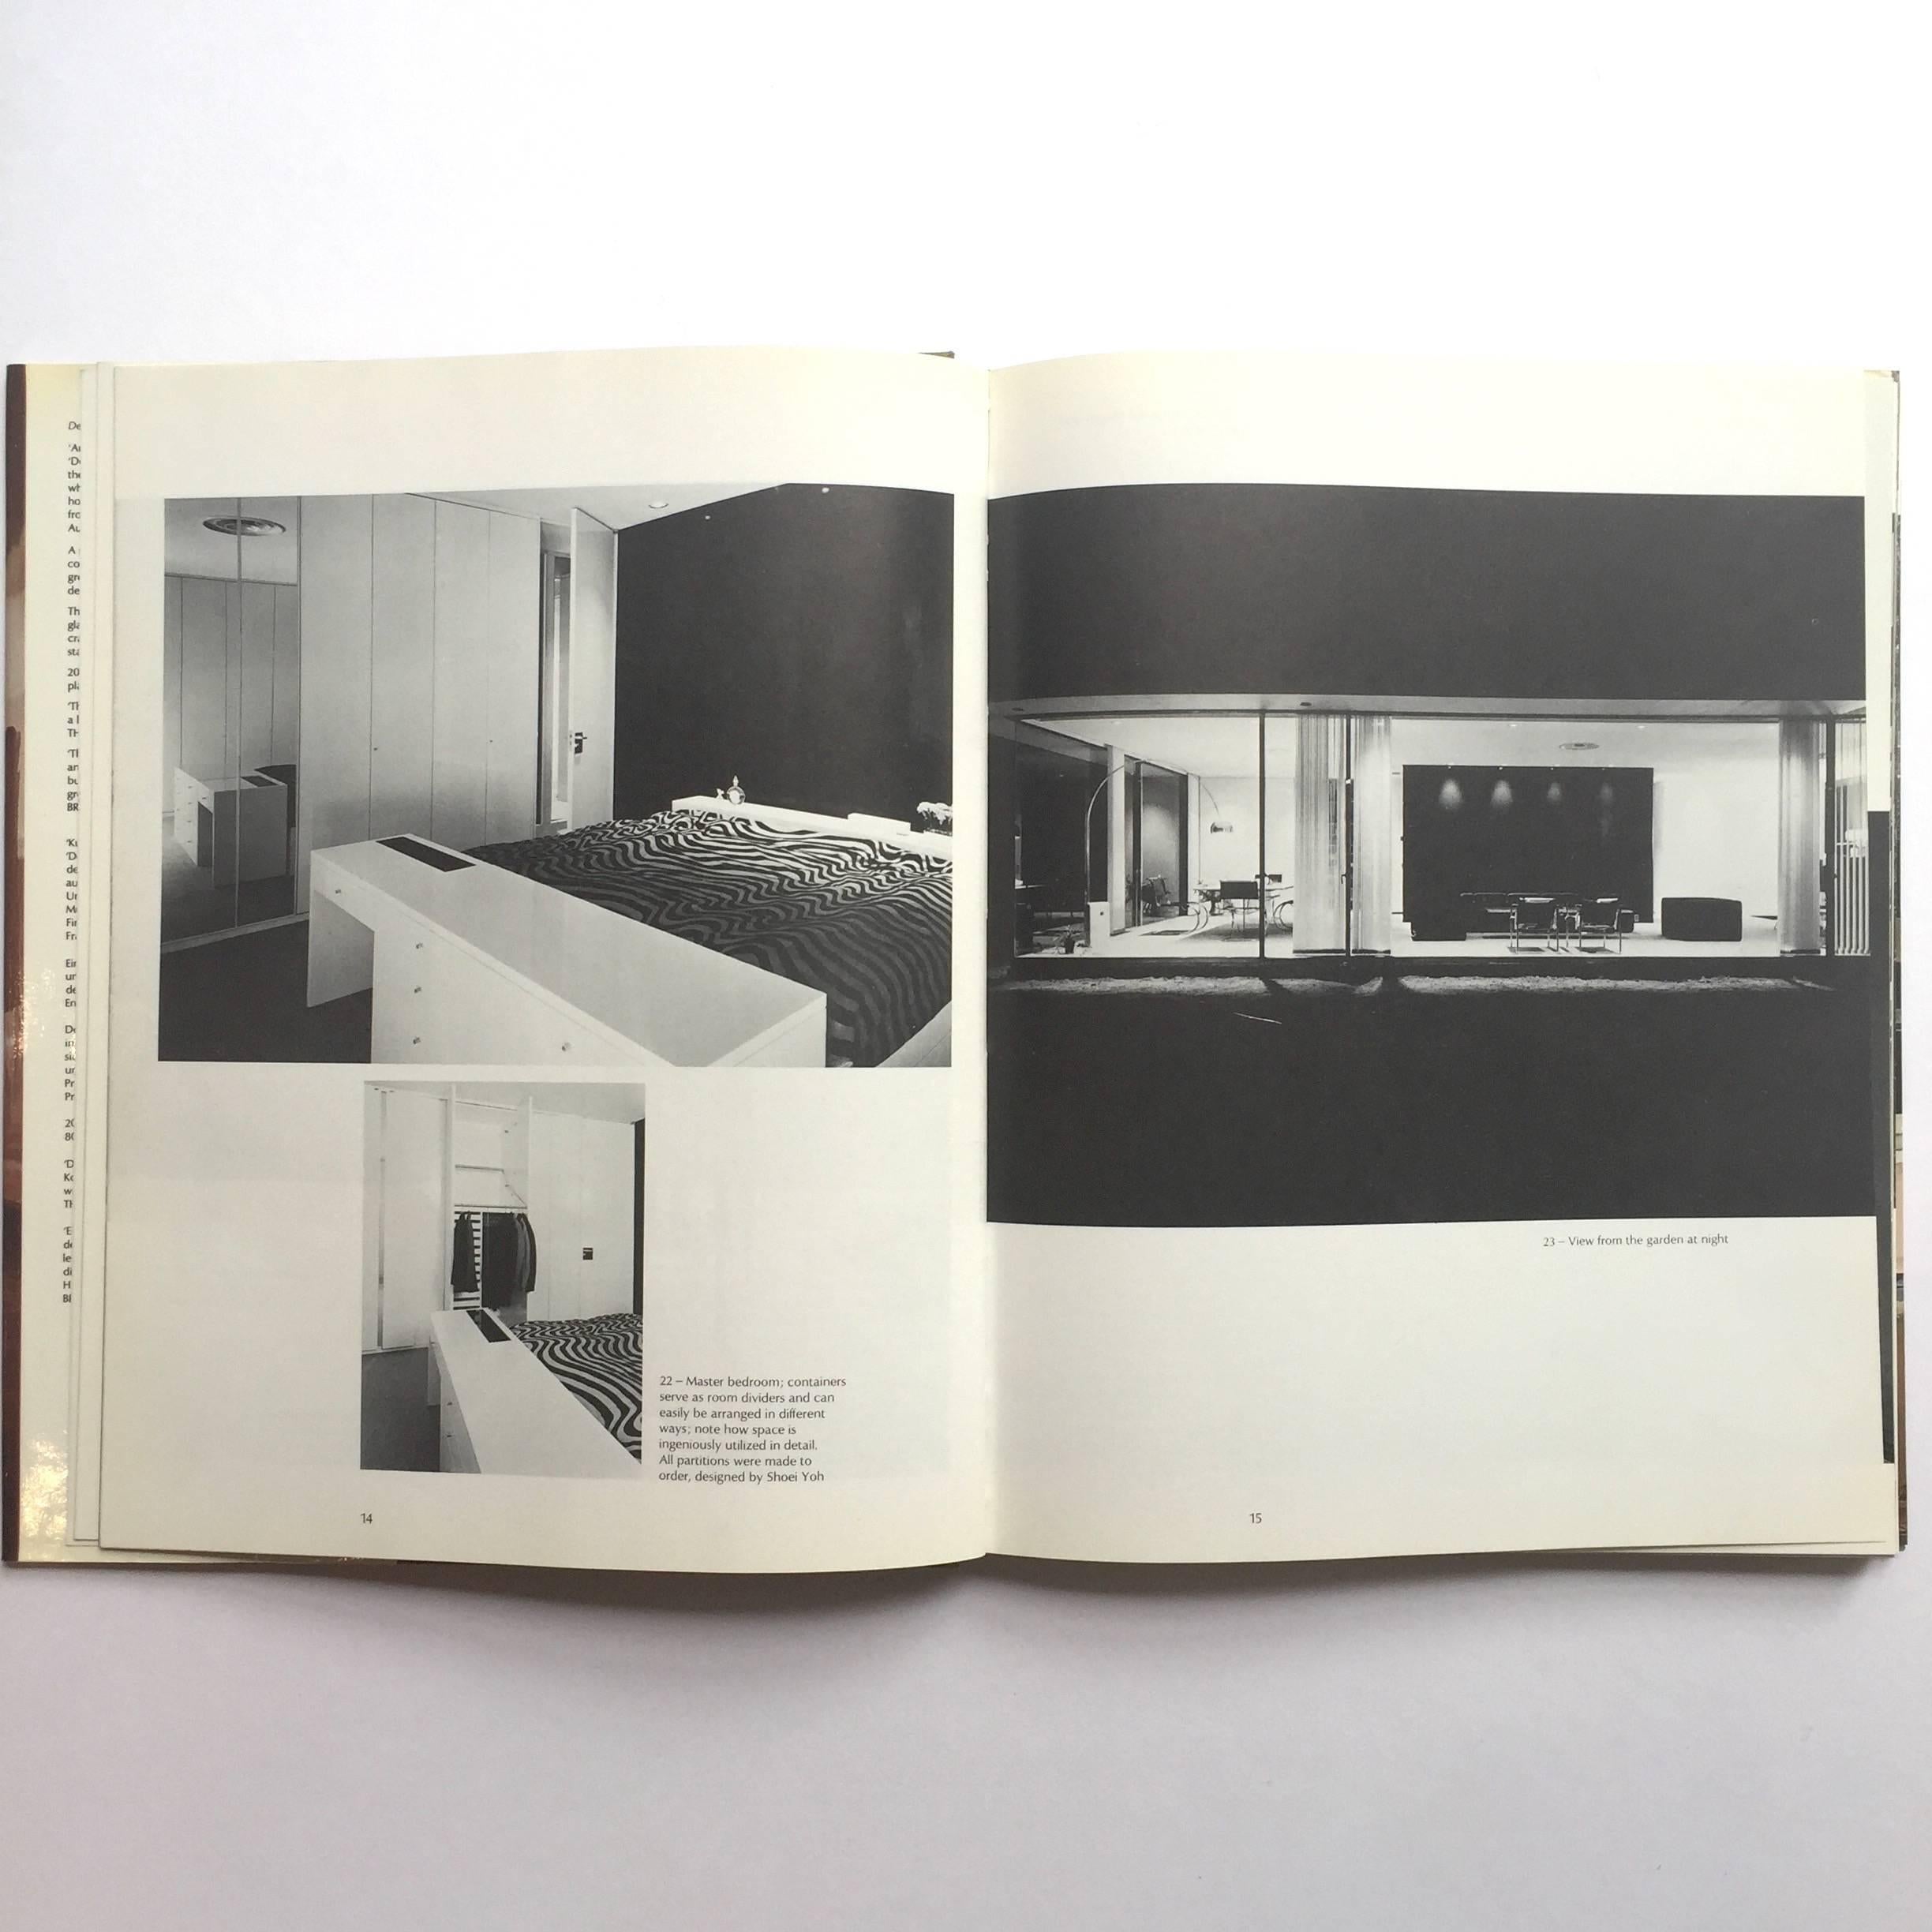 First edition, published by Studio Vista, 1977.

One of the annual Decorative Art and Modern Interiors publications, this book has a fabulous collection of the interiors of the late 1970s. Many of the designs in this book are reappearing in trends